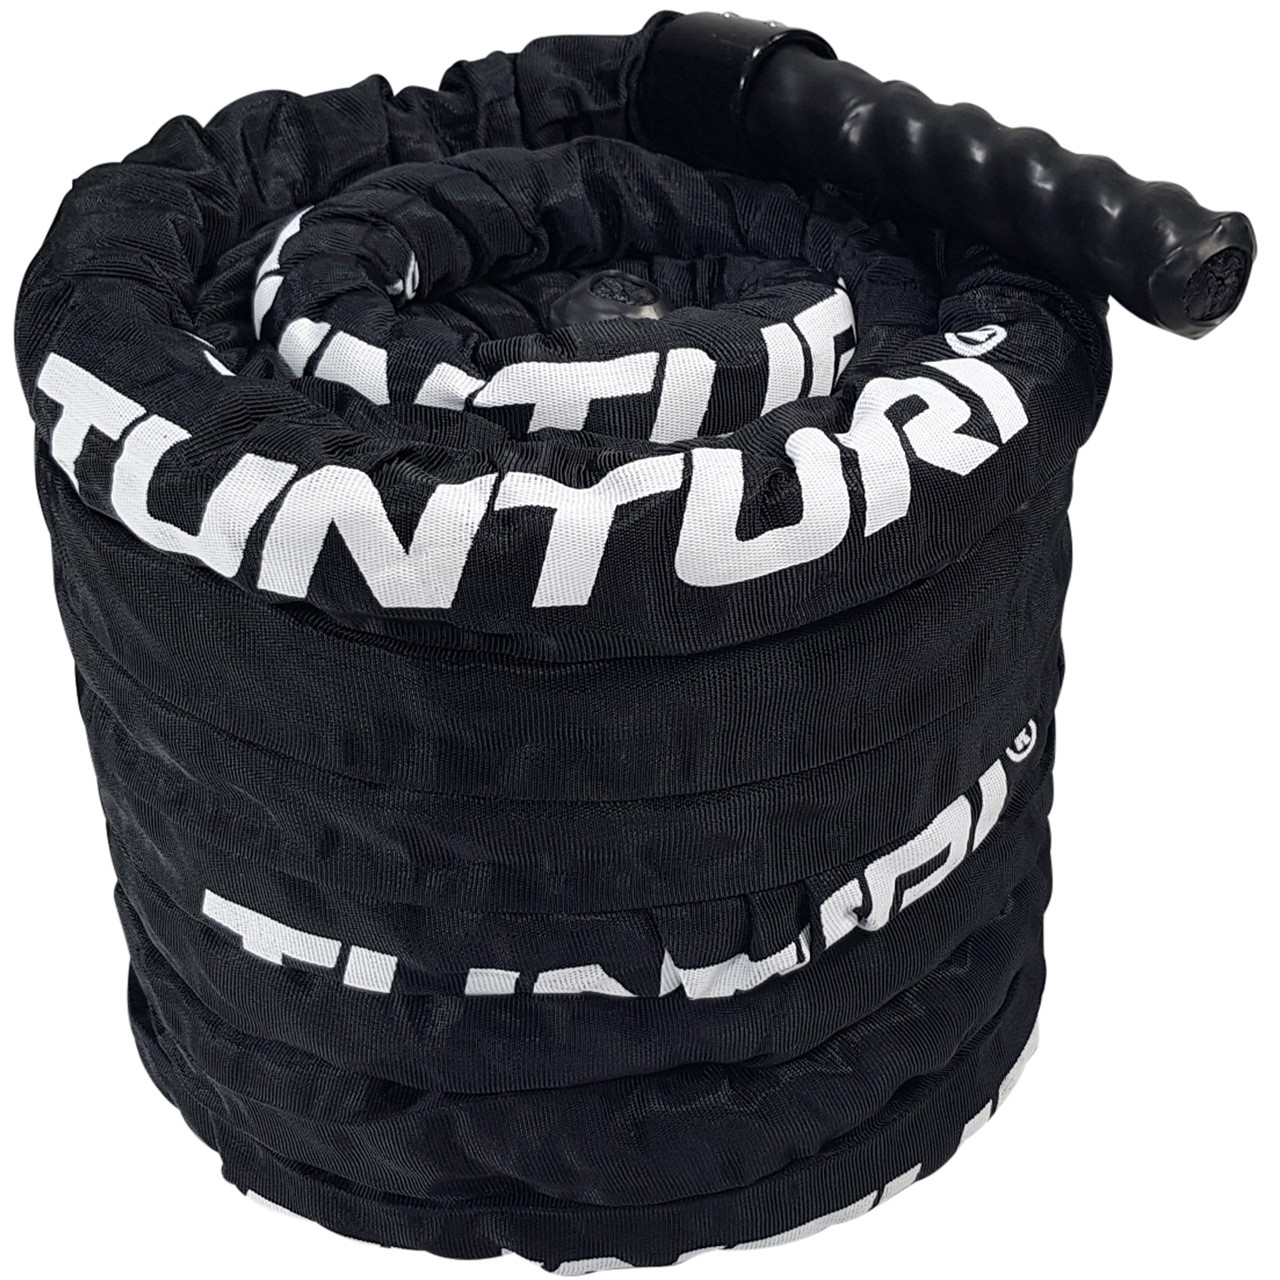 Tunturi Pro Battle Rope with Protective Cover 15 m